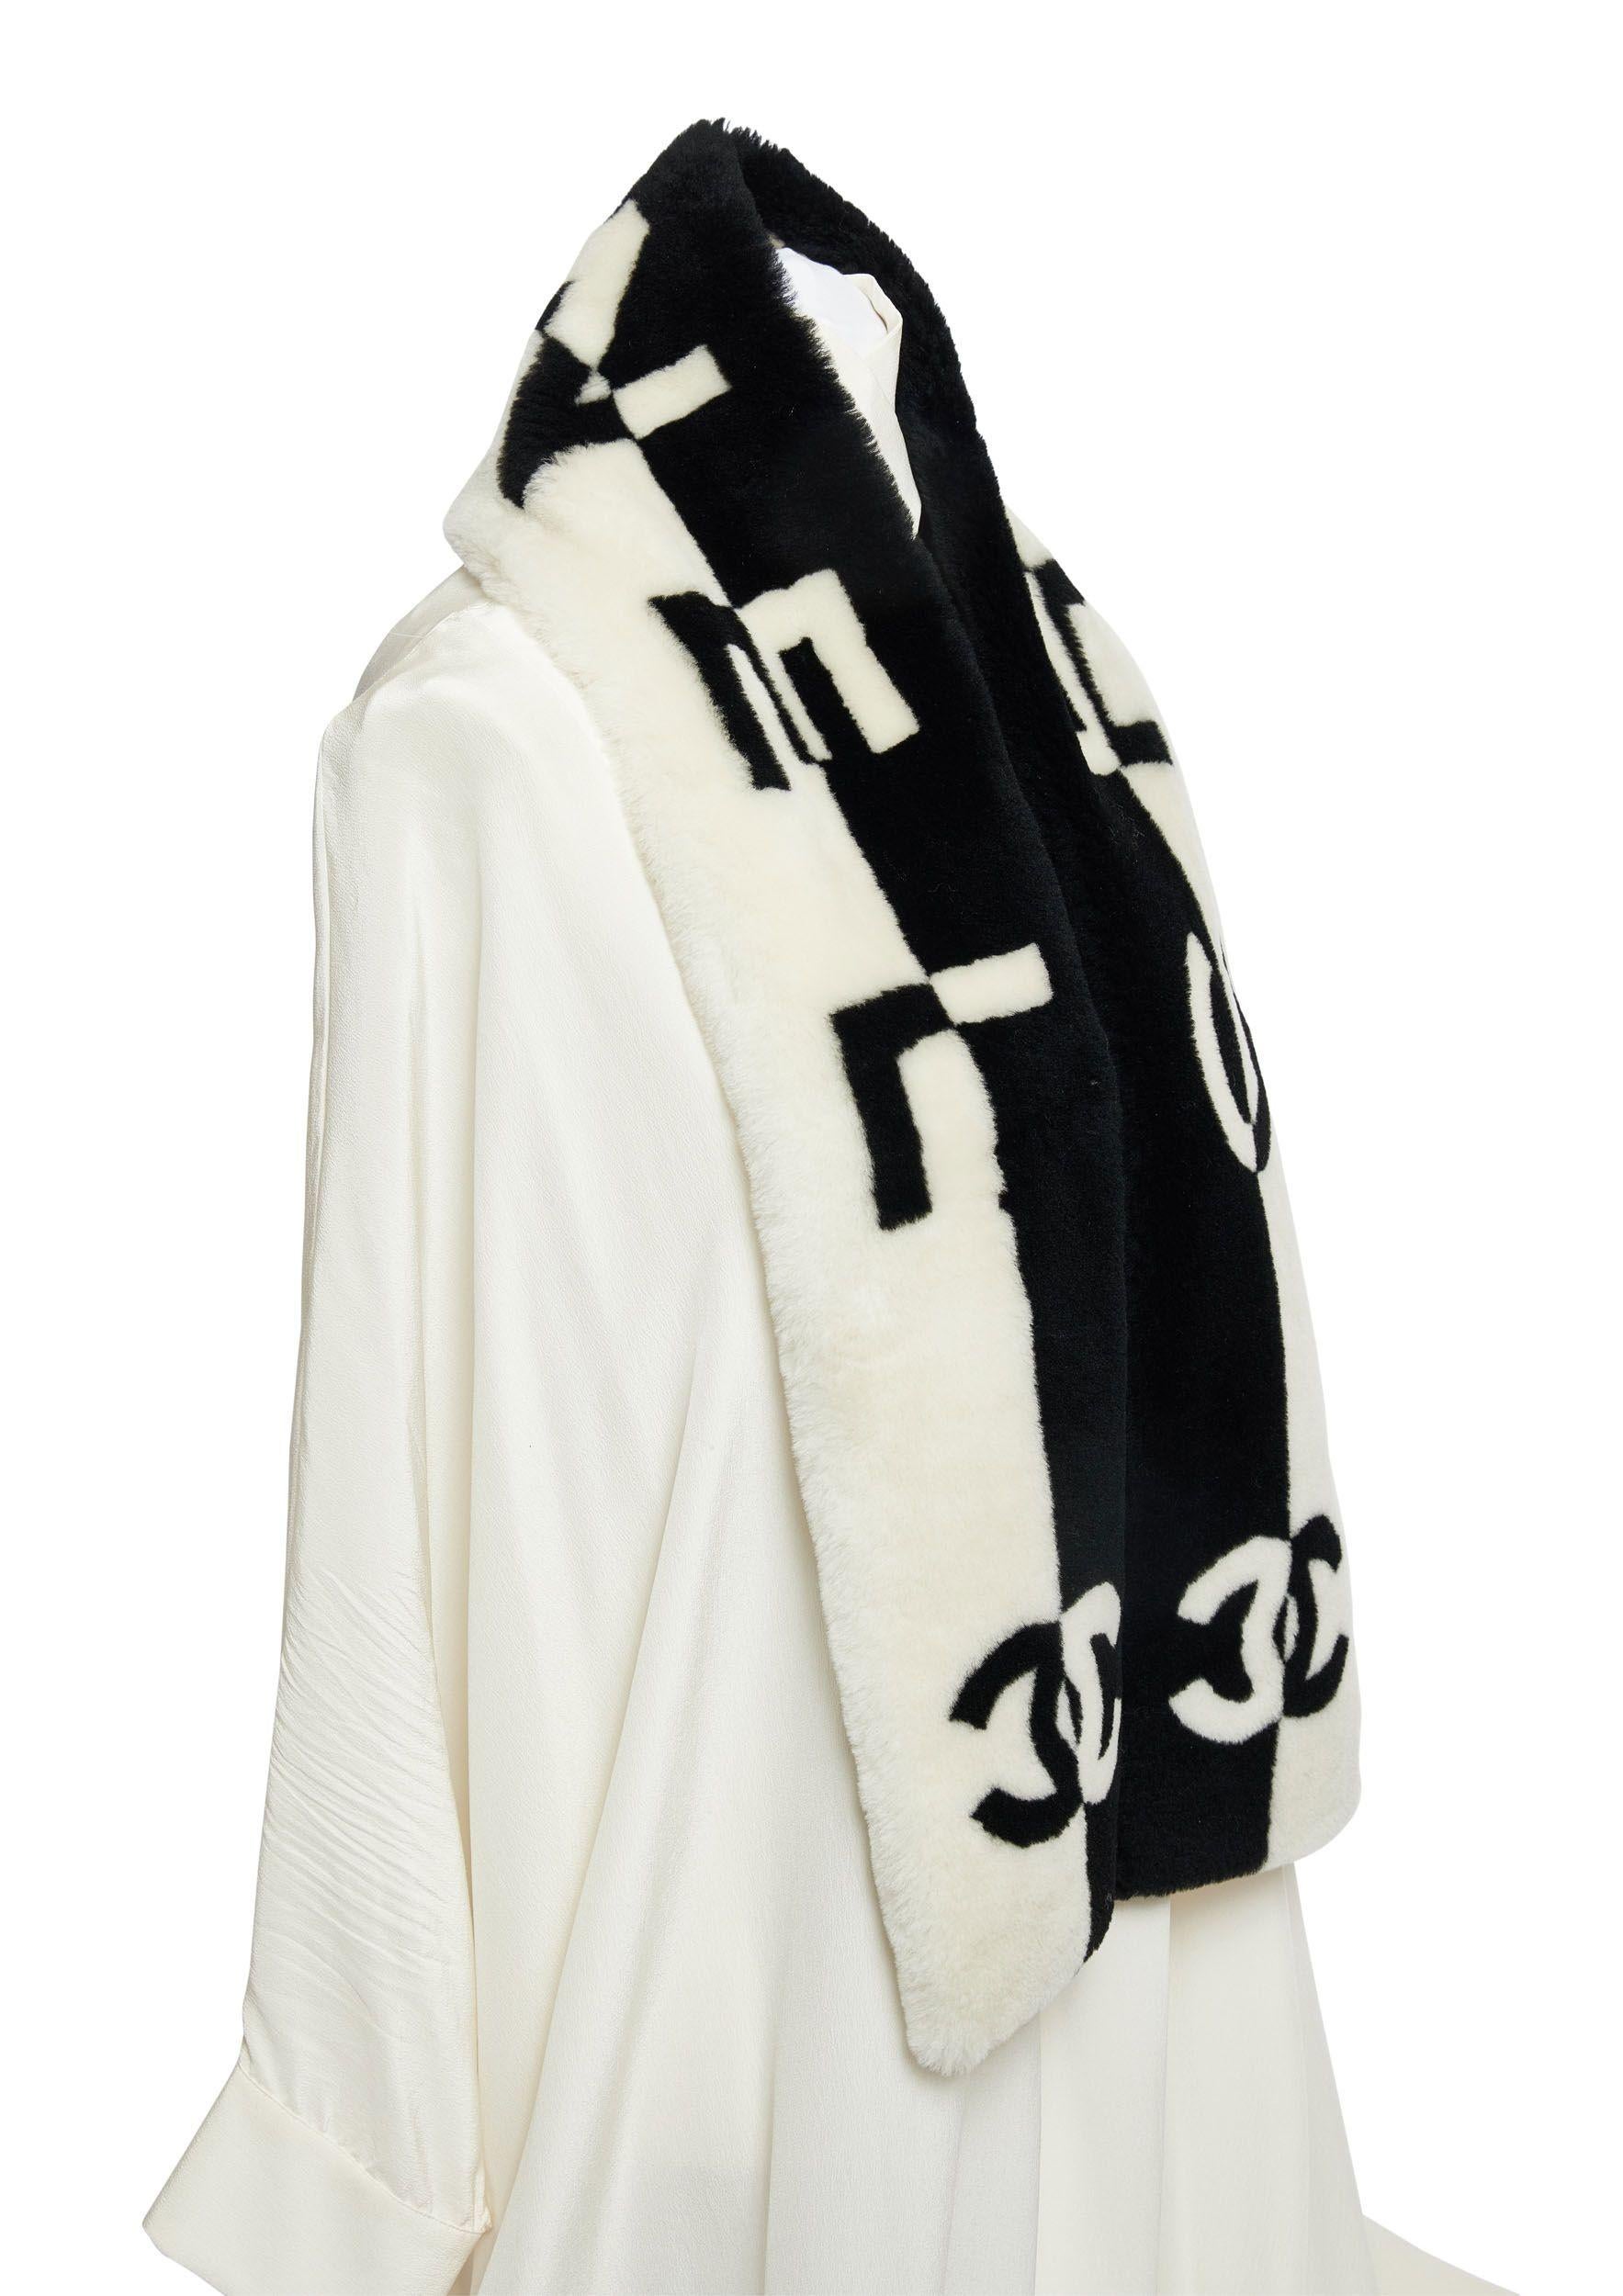 Chanel new black and white sheepskin scarf with black and white Chanel letters and CC logo in contrast.
Cashmere lining